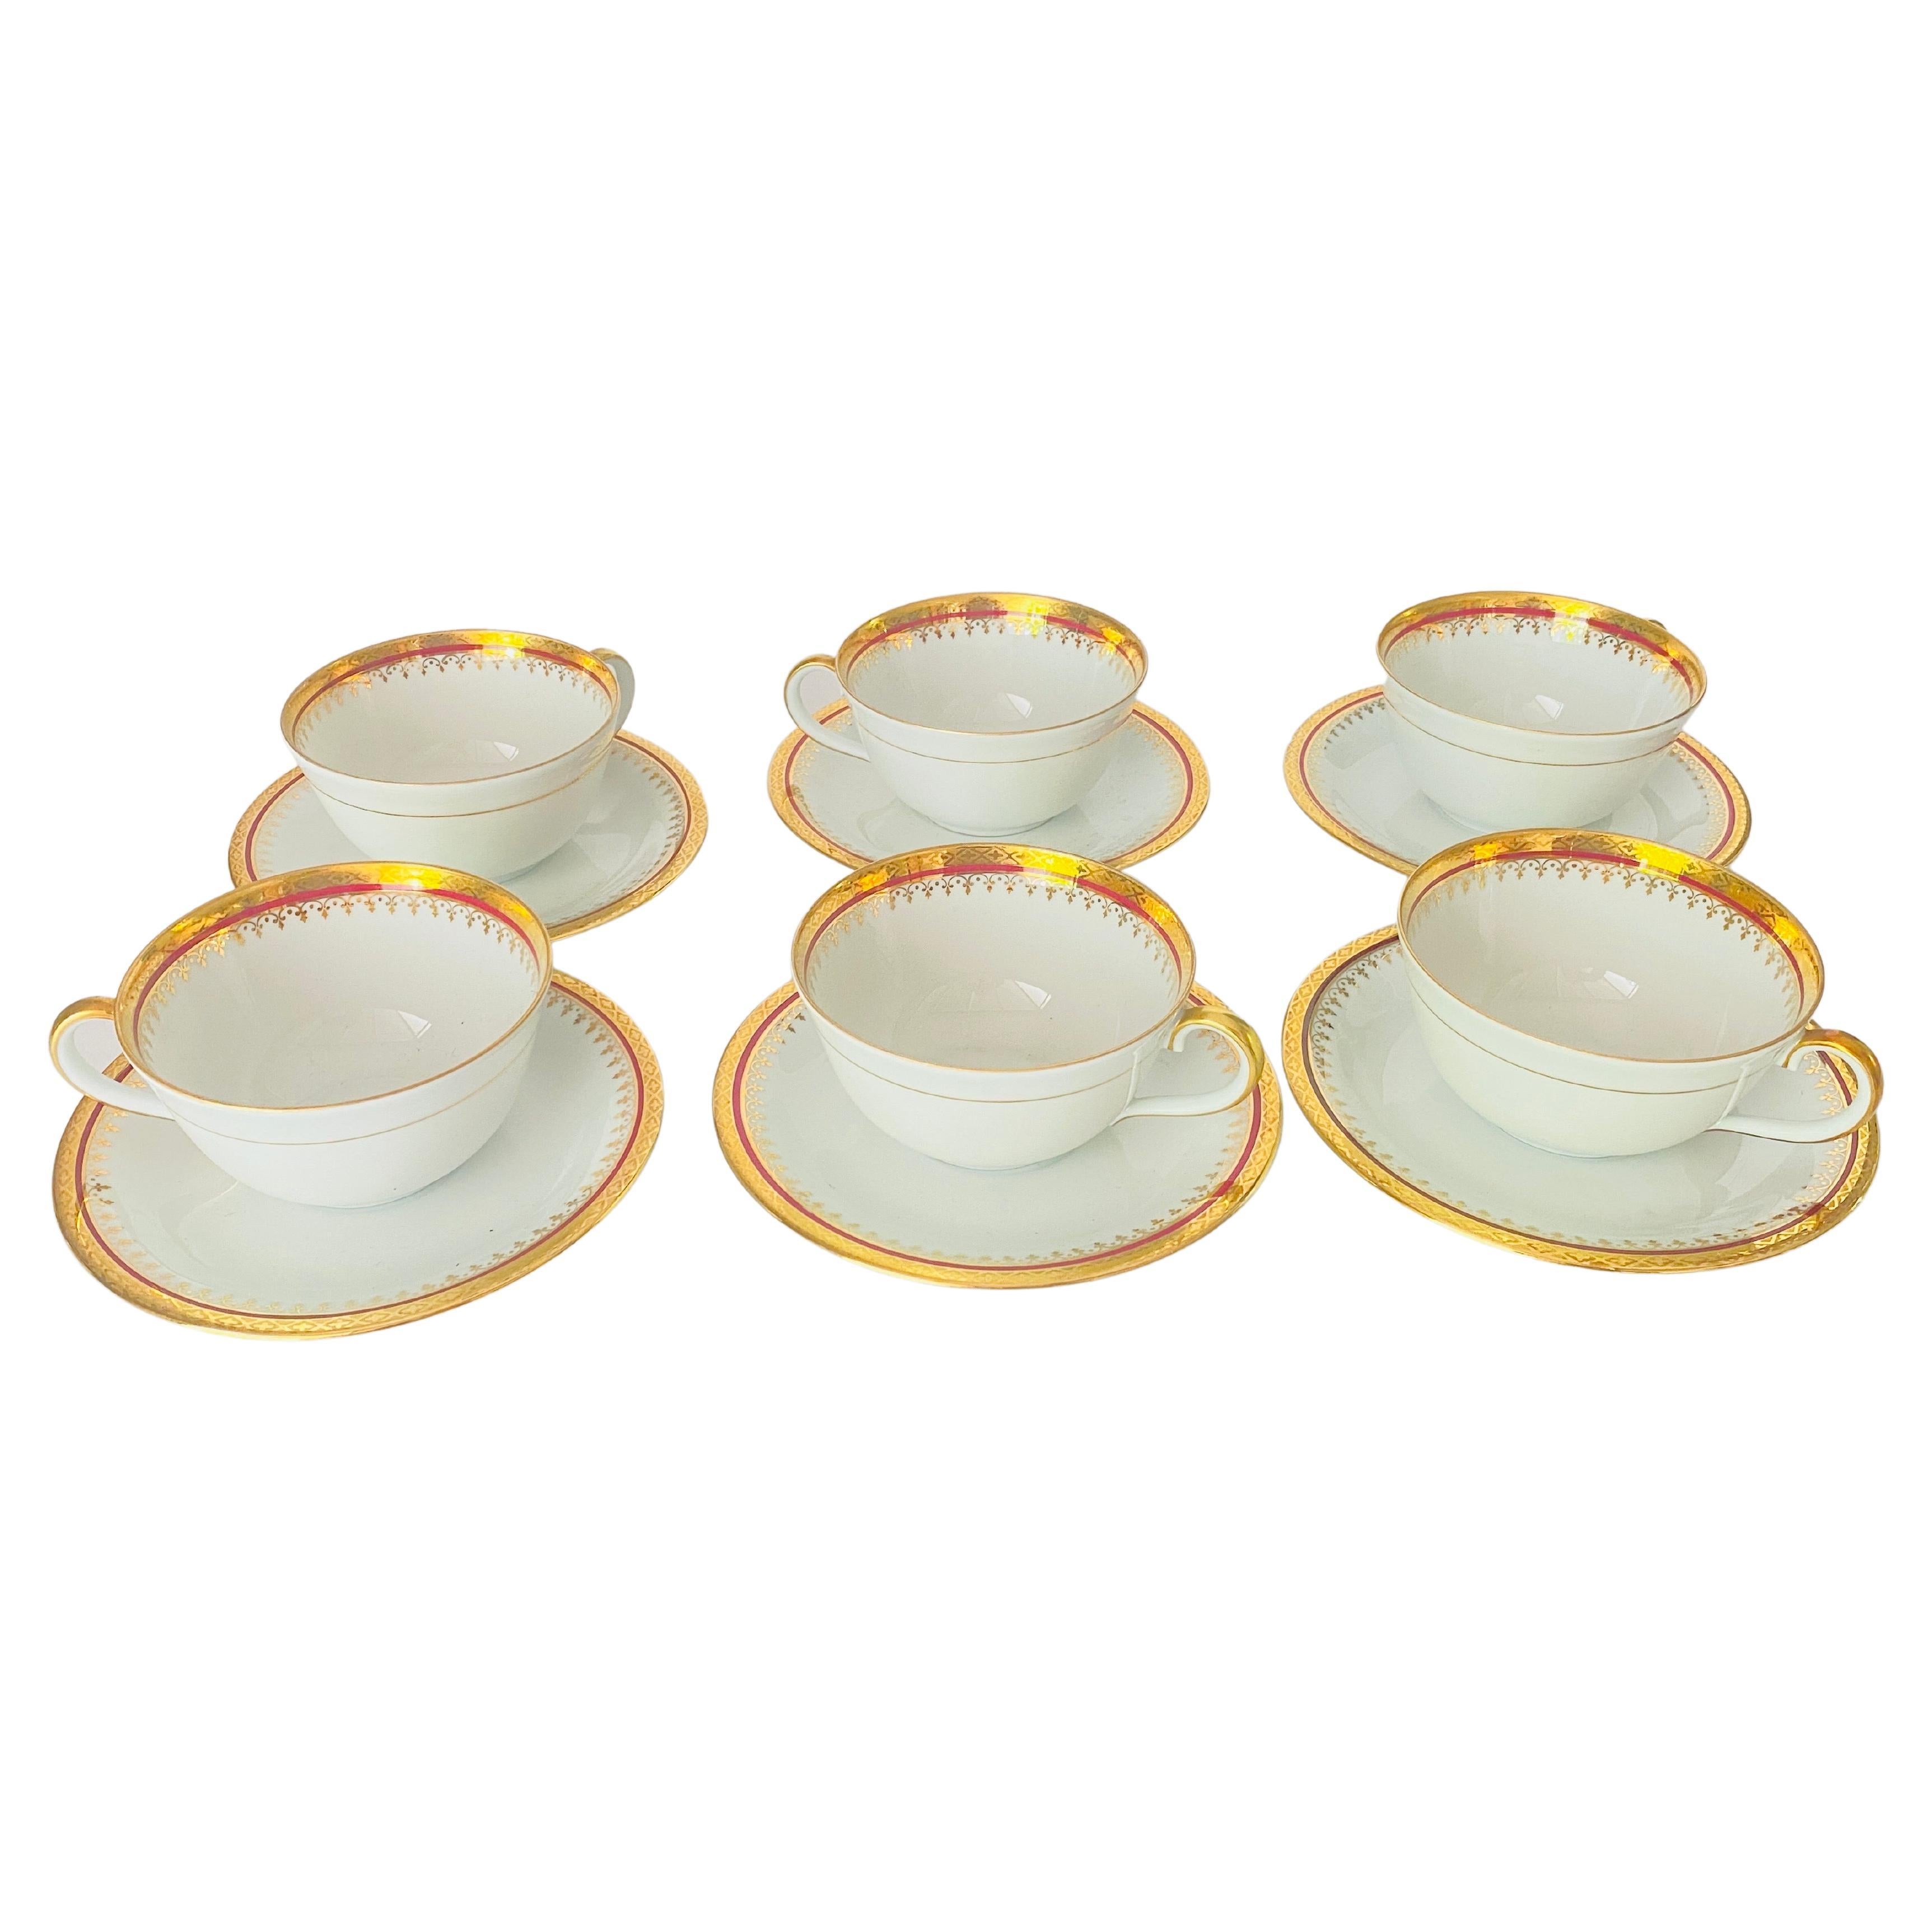 Midcentury Limoges Coffee Cup and under Plates in Porcelain and Gold 12 Pieces